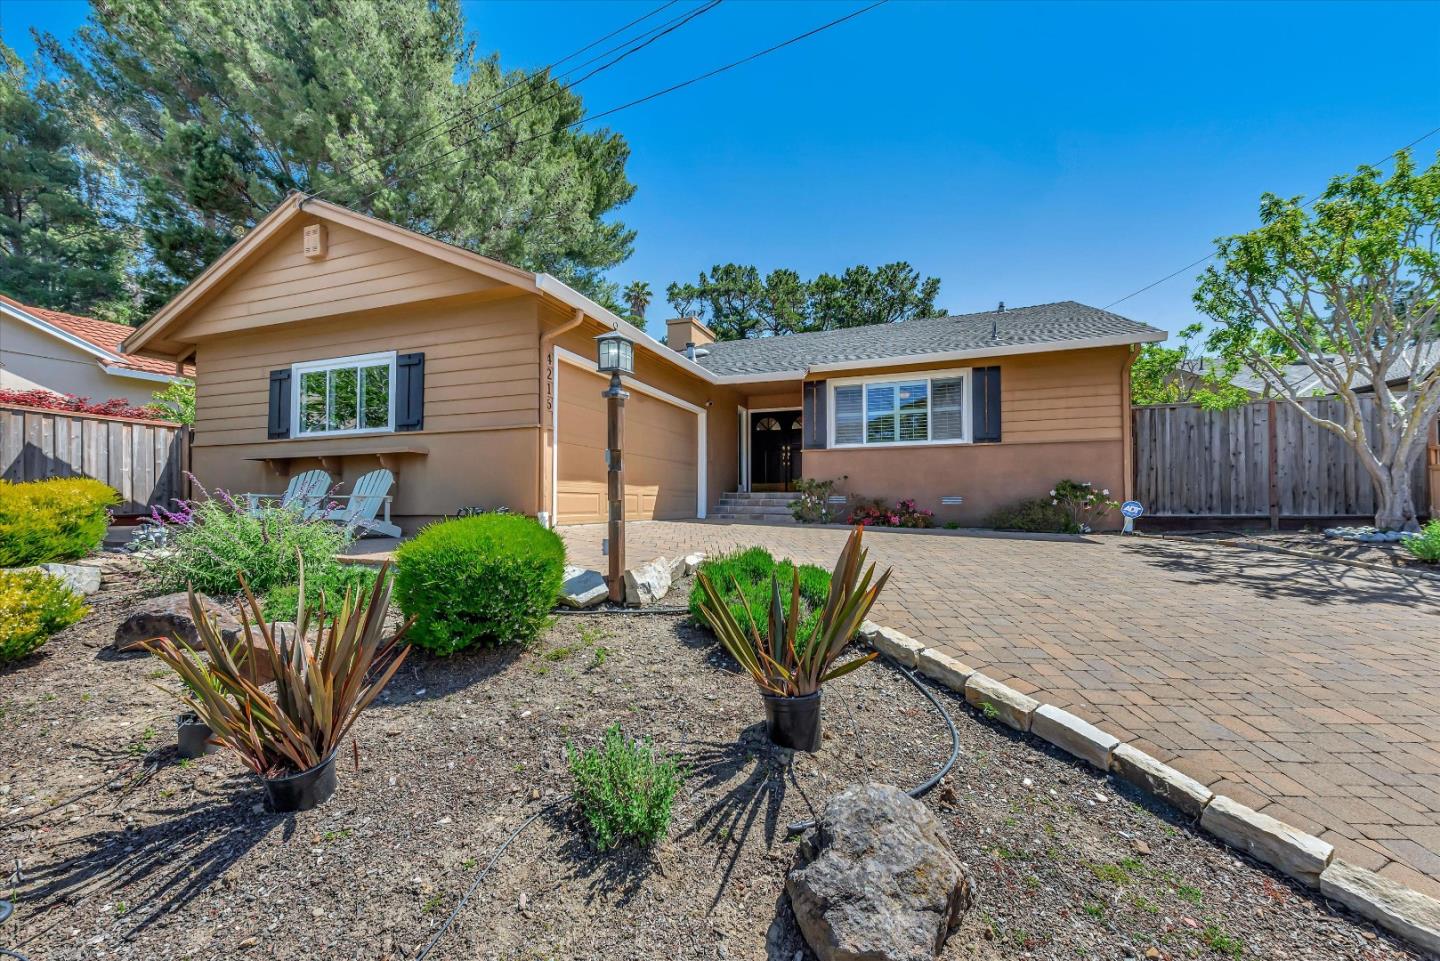 Photo of 4216 Skymont Dr in Belmont, CA